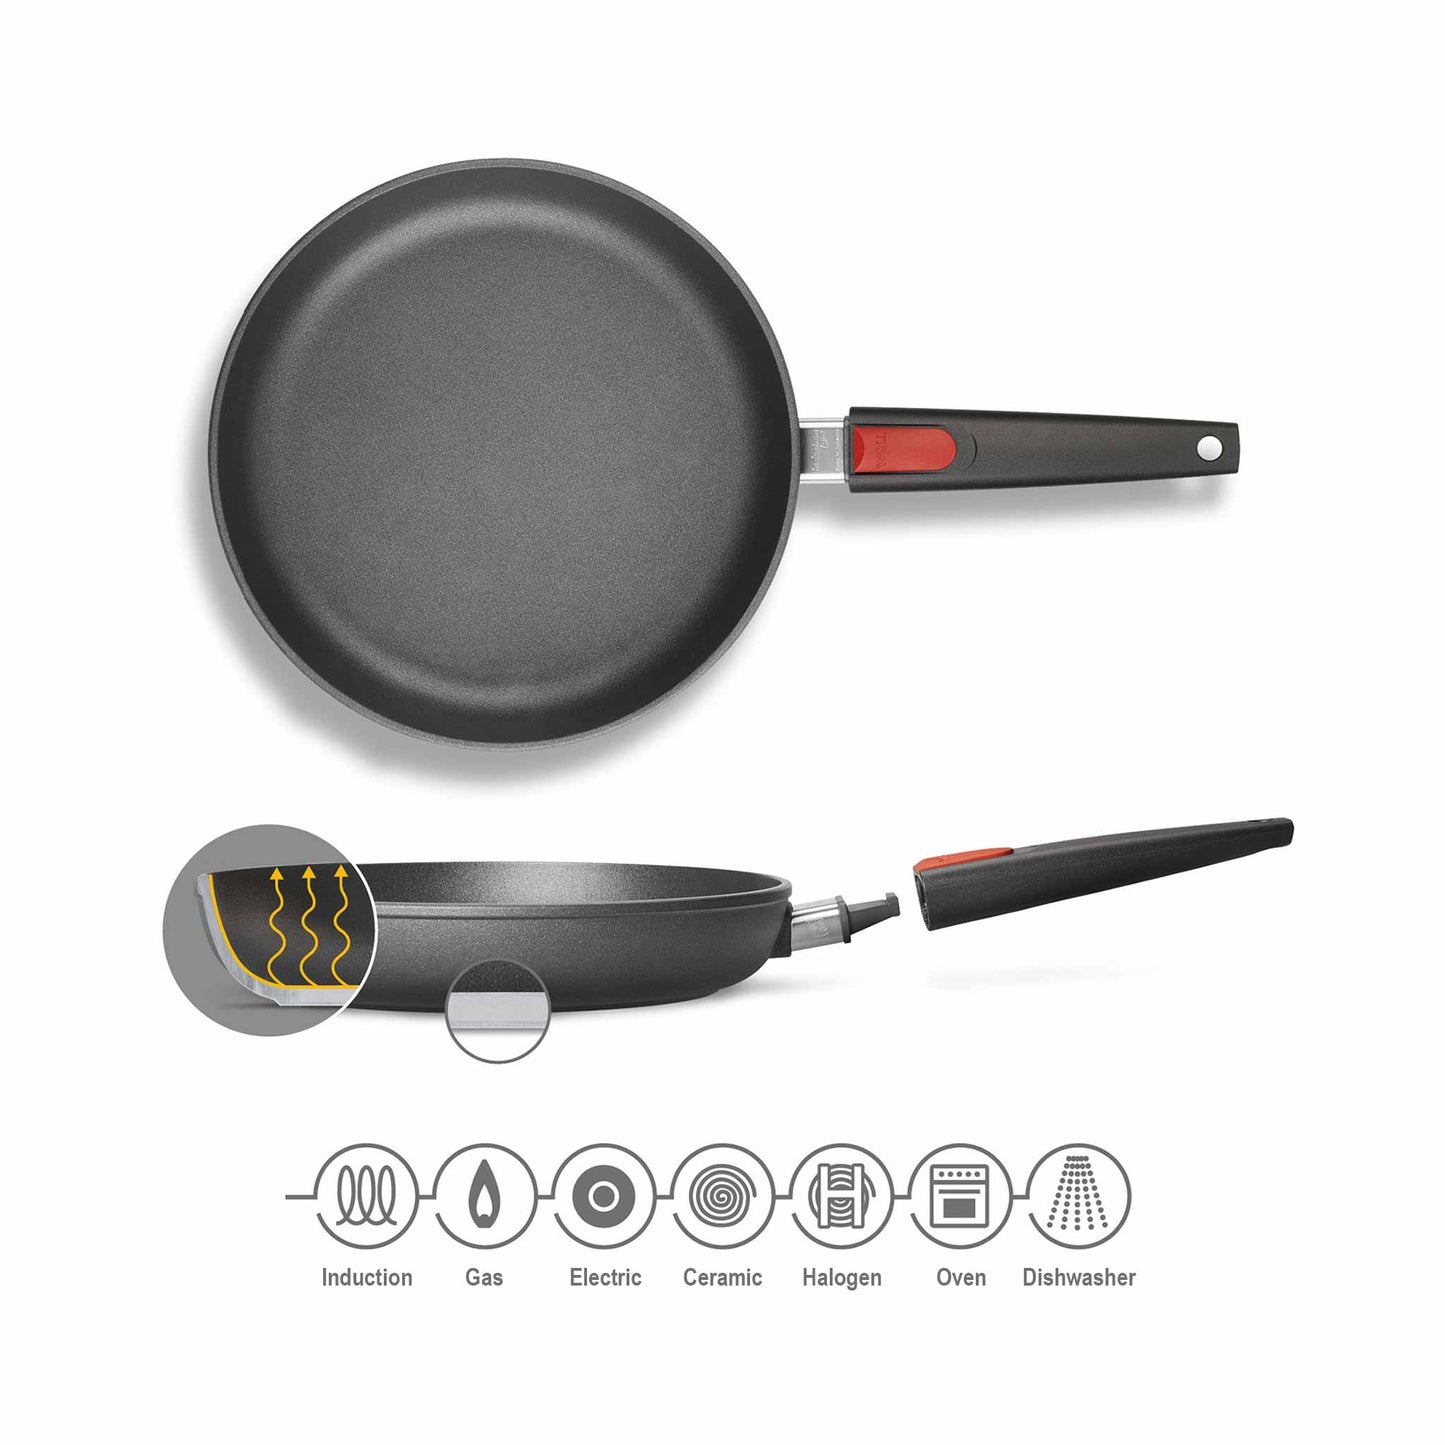 Woll Frying Pans